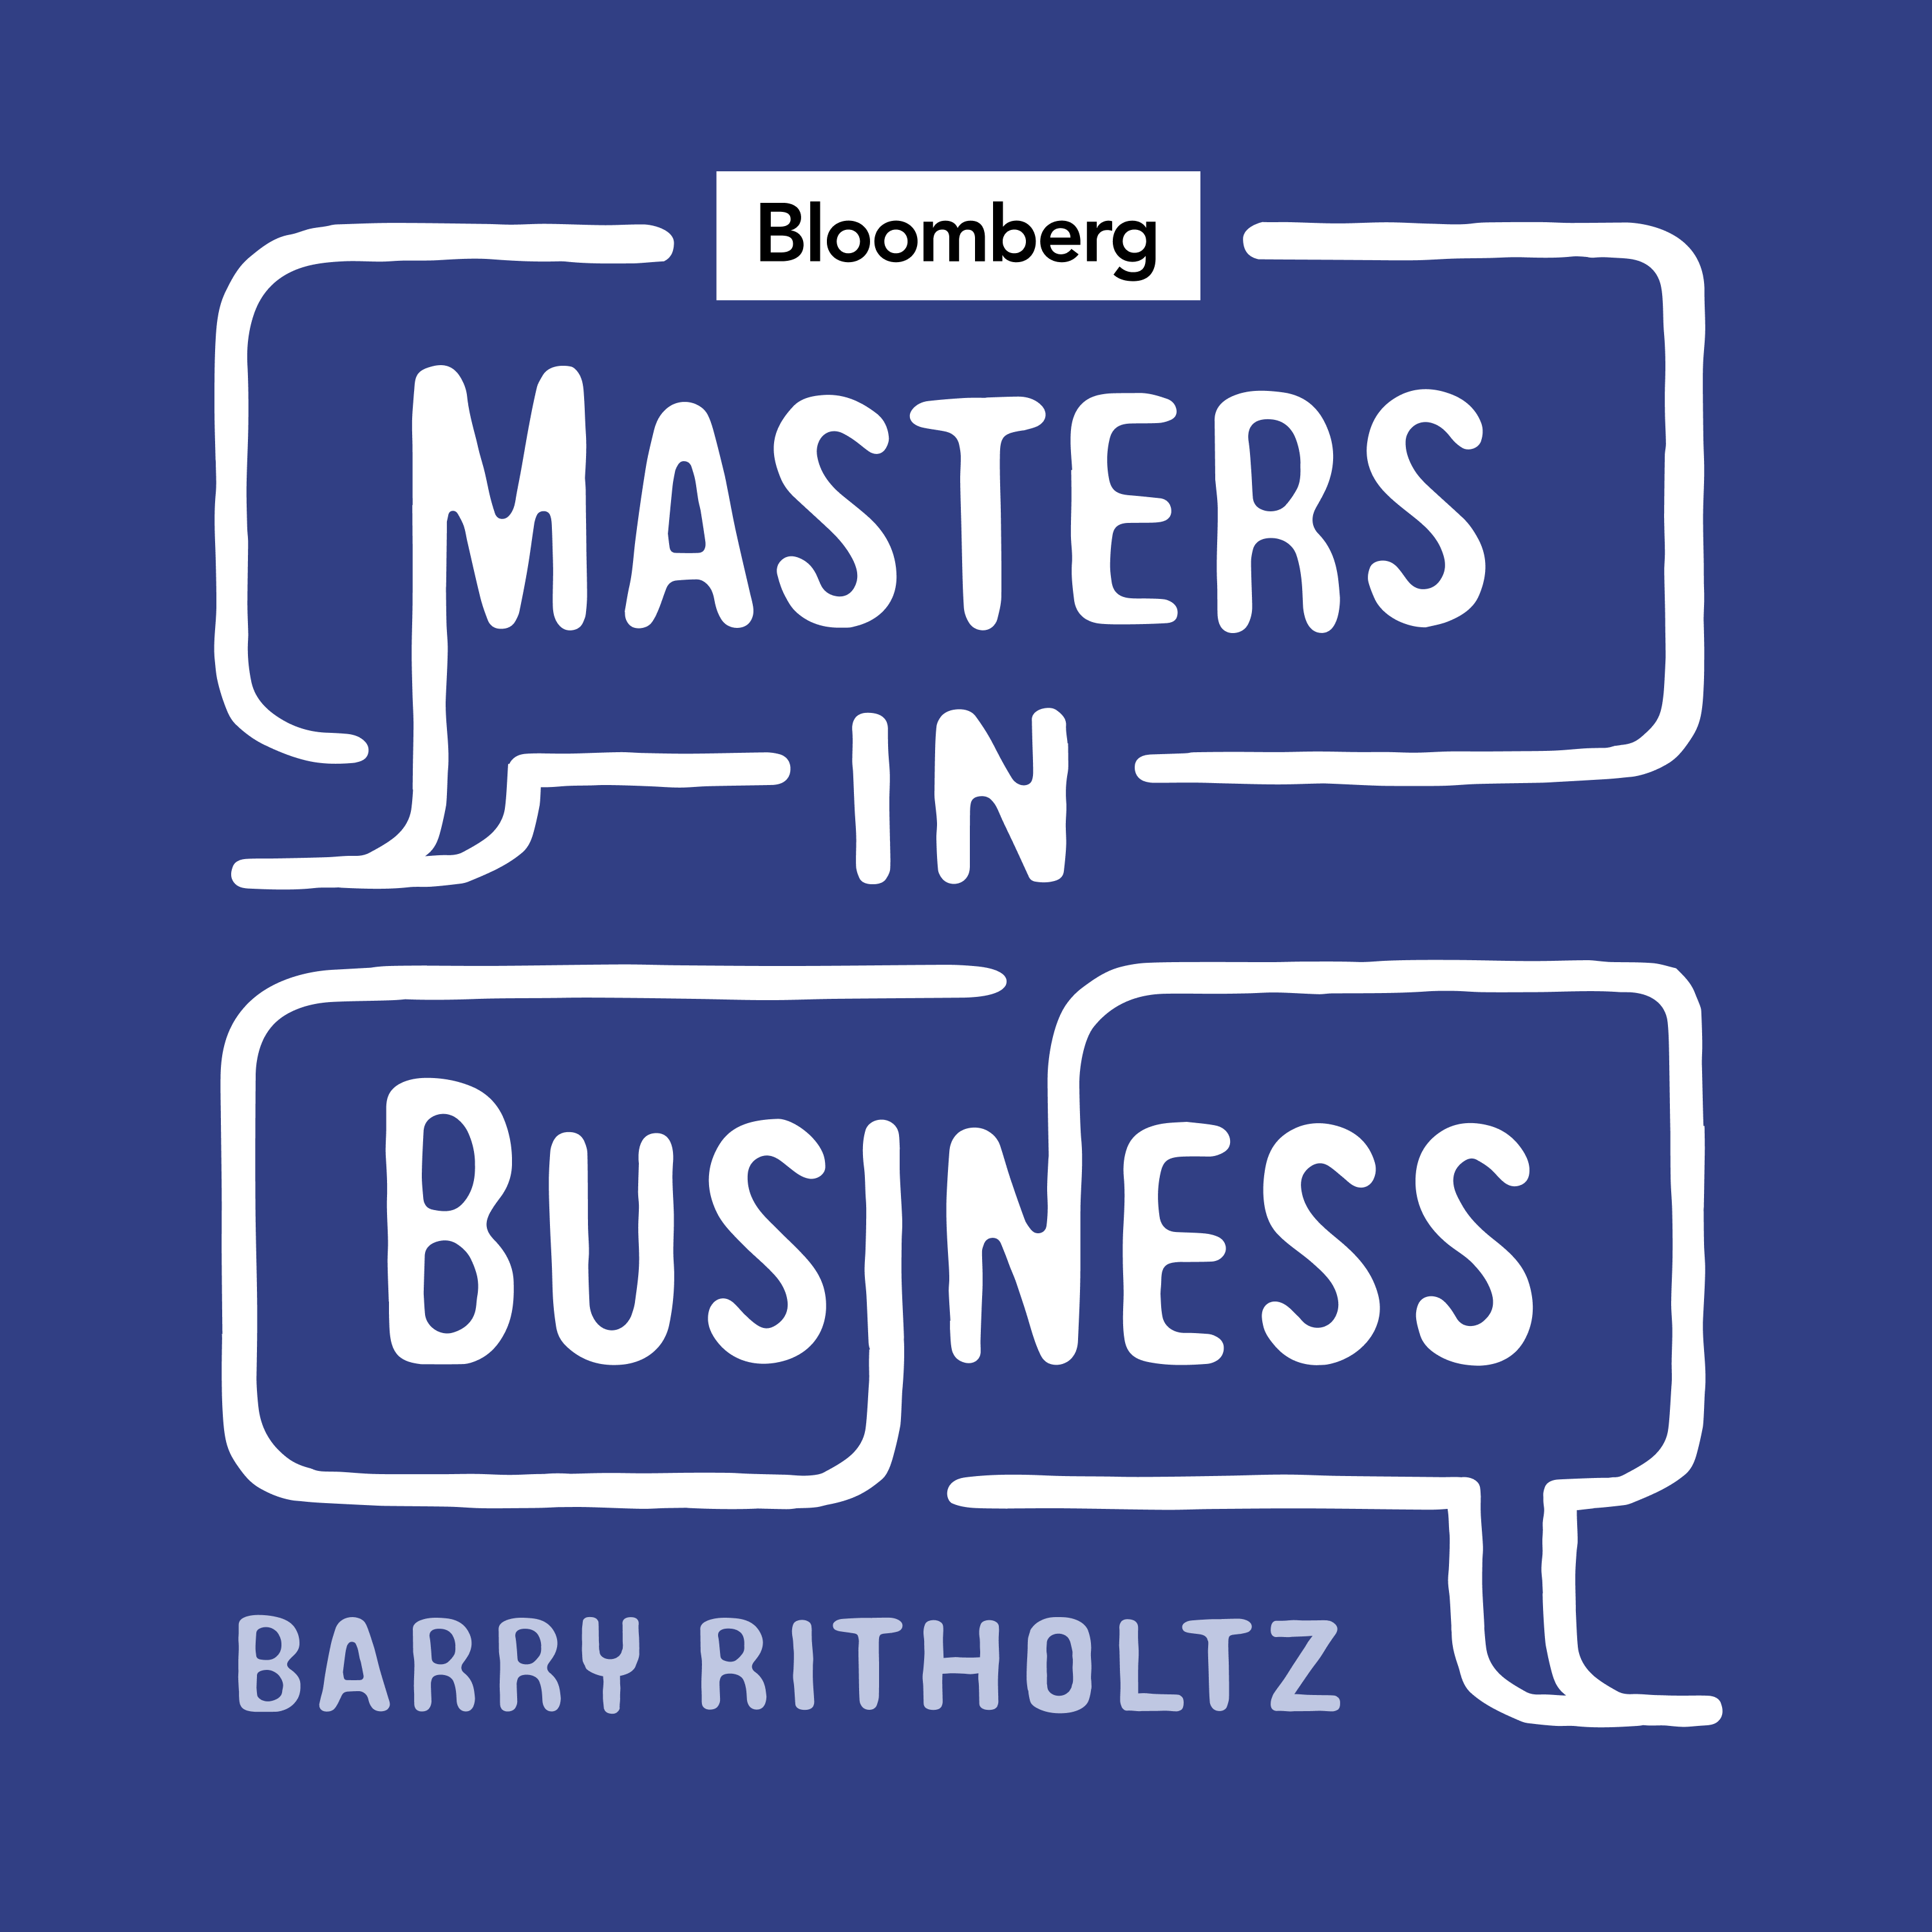 Masters in Business: AQR Scott Cliff Asness (Audio)